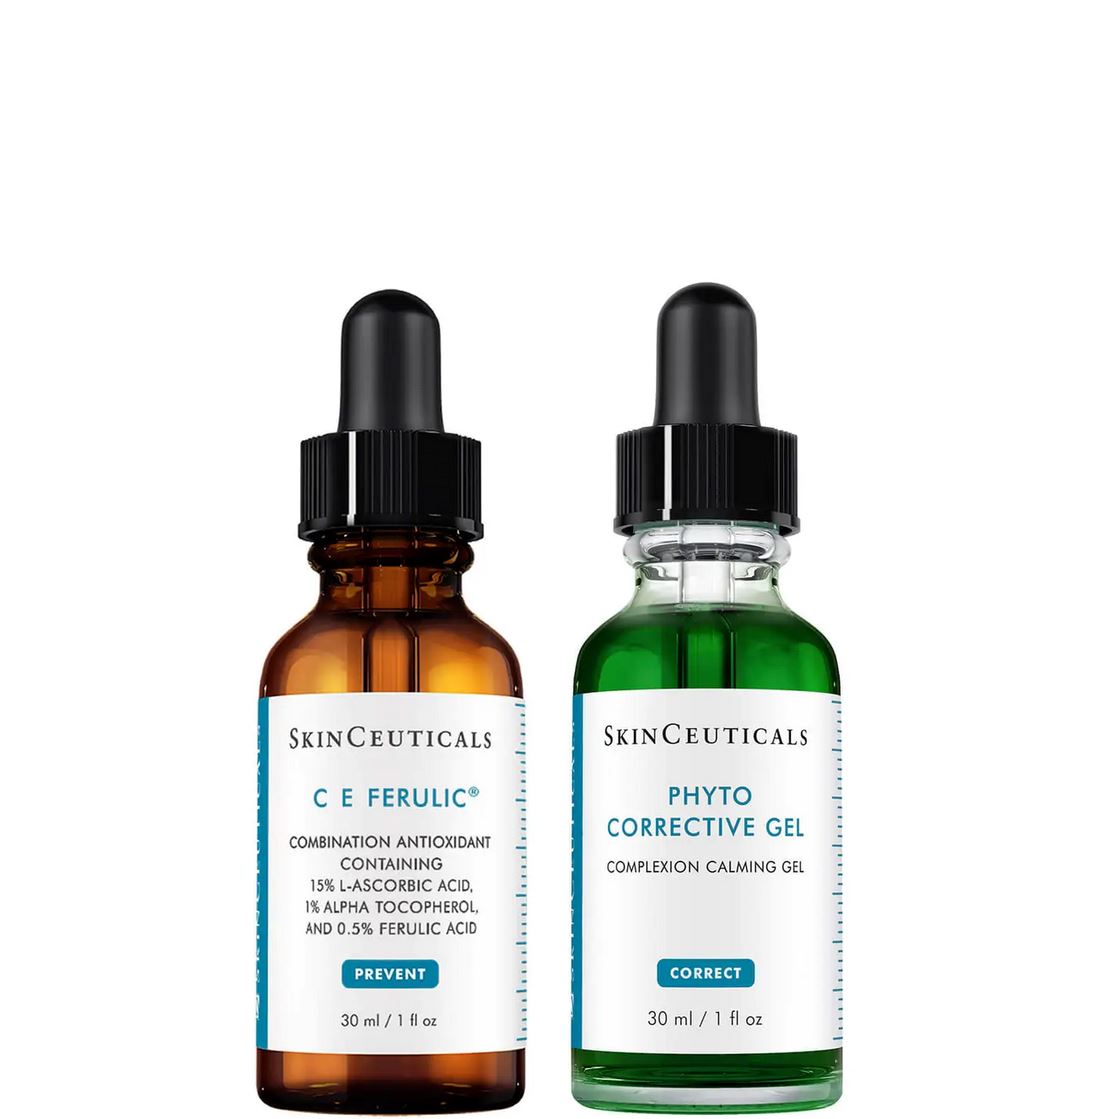 SkinCeuticals Vitamin C DUO for Sensitive Skin (CE Ferulic + Phyto Corrective Gel) $239 Value SkinCeuticals Shop at Exclusive Beauty Club